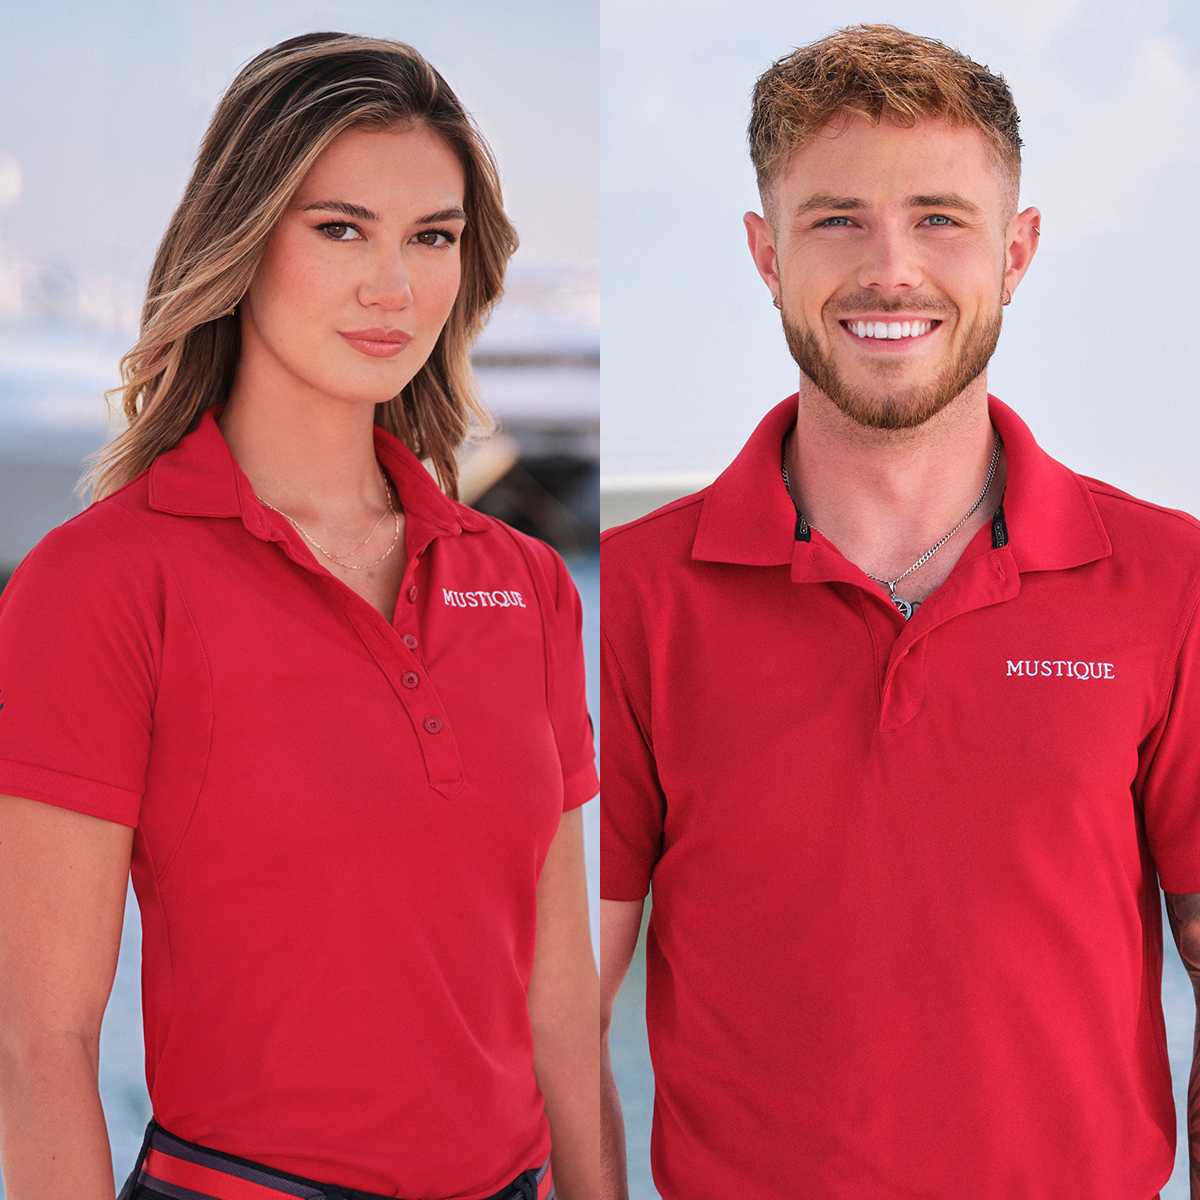 A Below Deck Med Cheating Scandal Is About to Rock the Boat